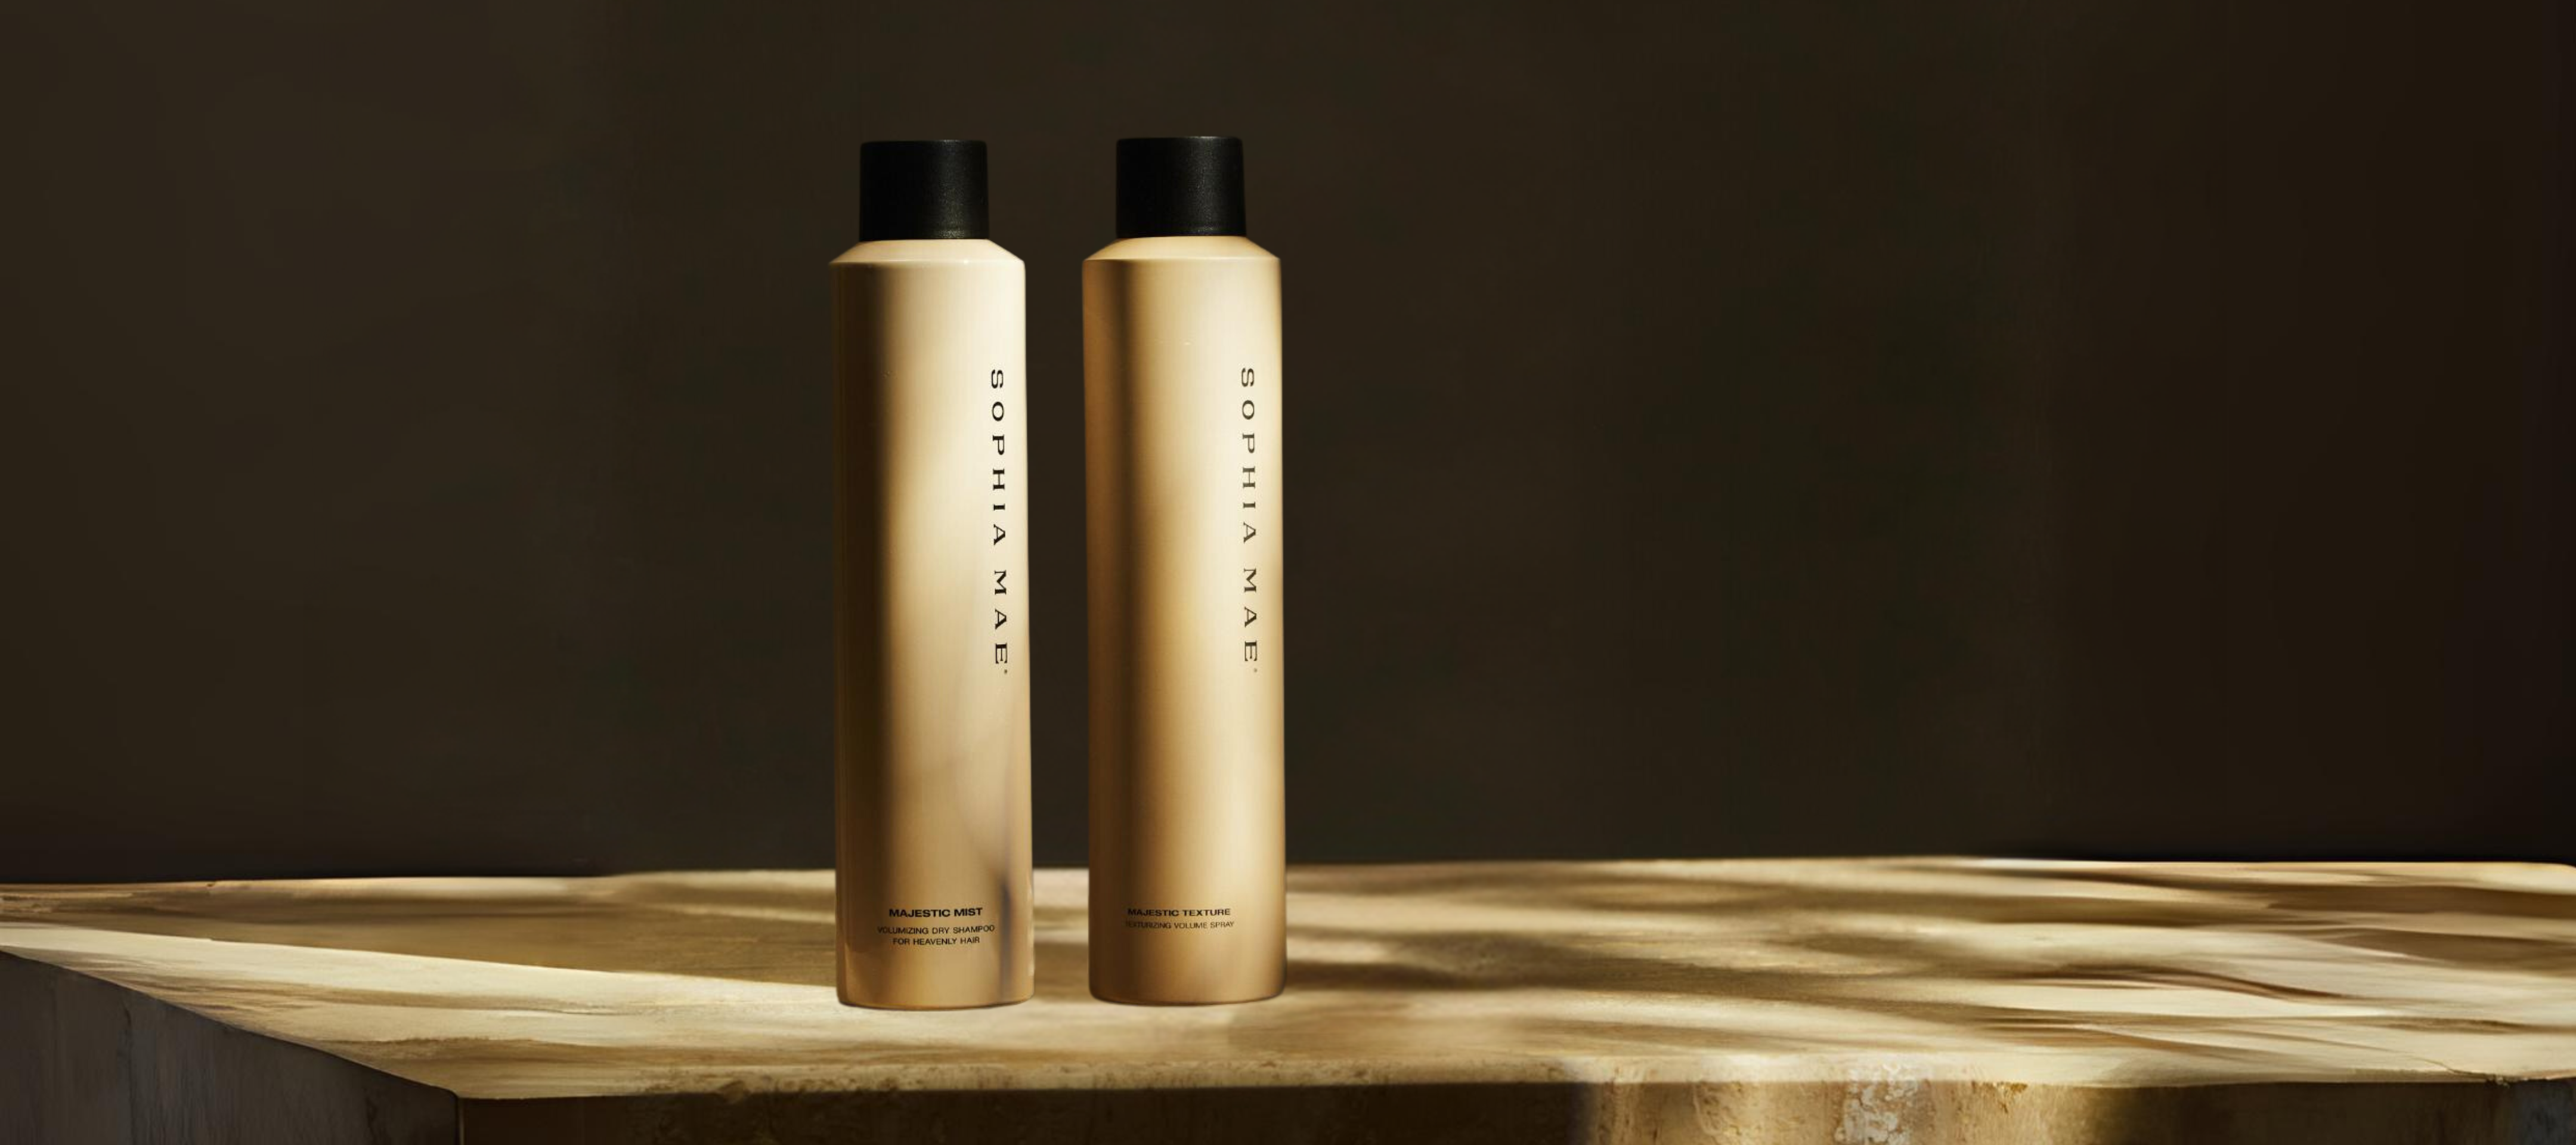 Majestic texture and Majestic mist - Bestselling hair products by SOPHIA MAE